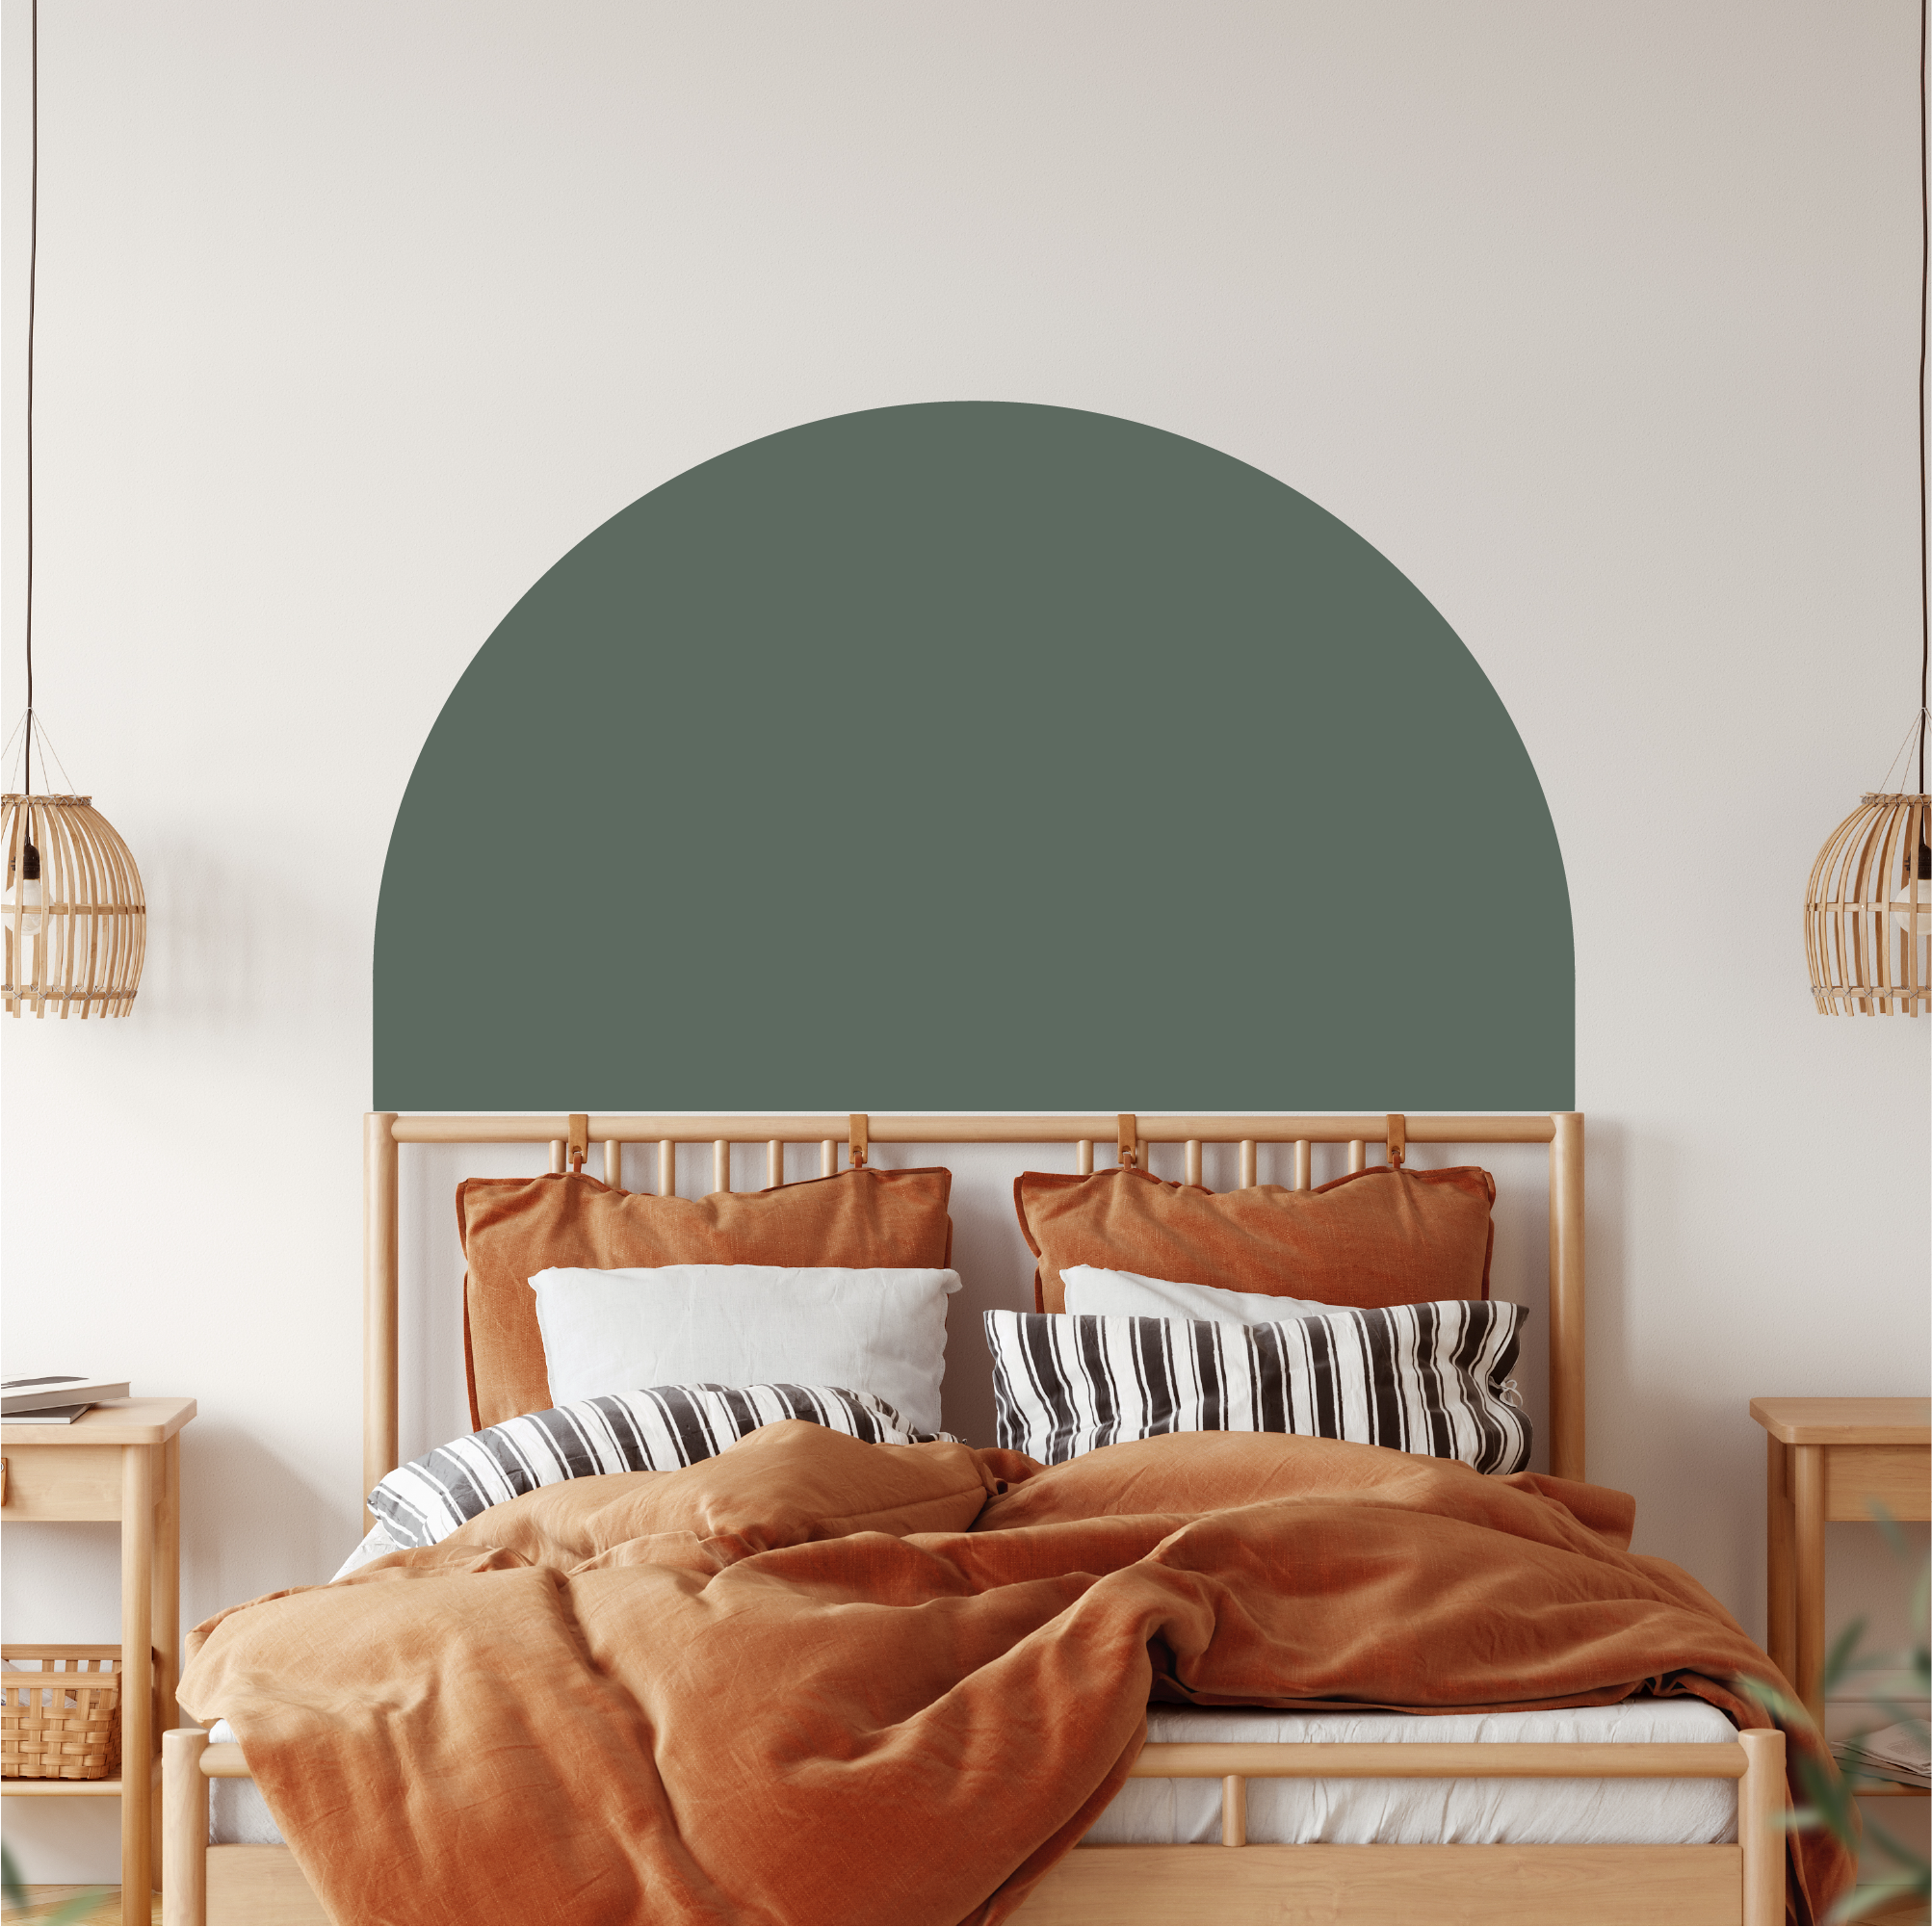 Transform Your Bedroom with Stylish Wall Art Stickers